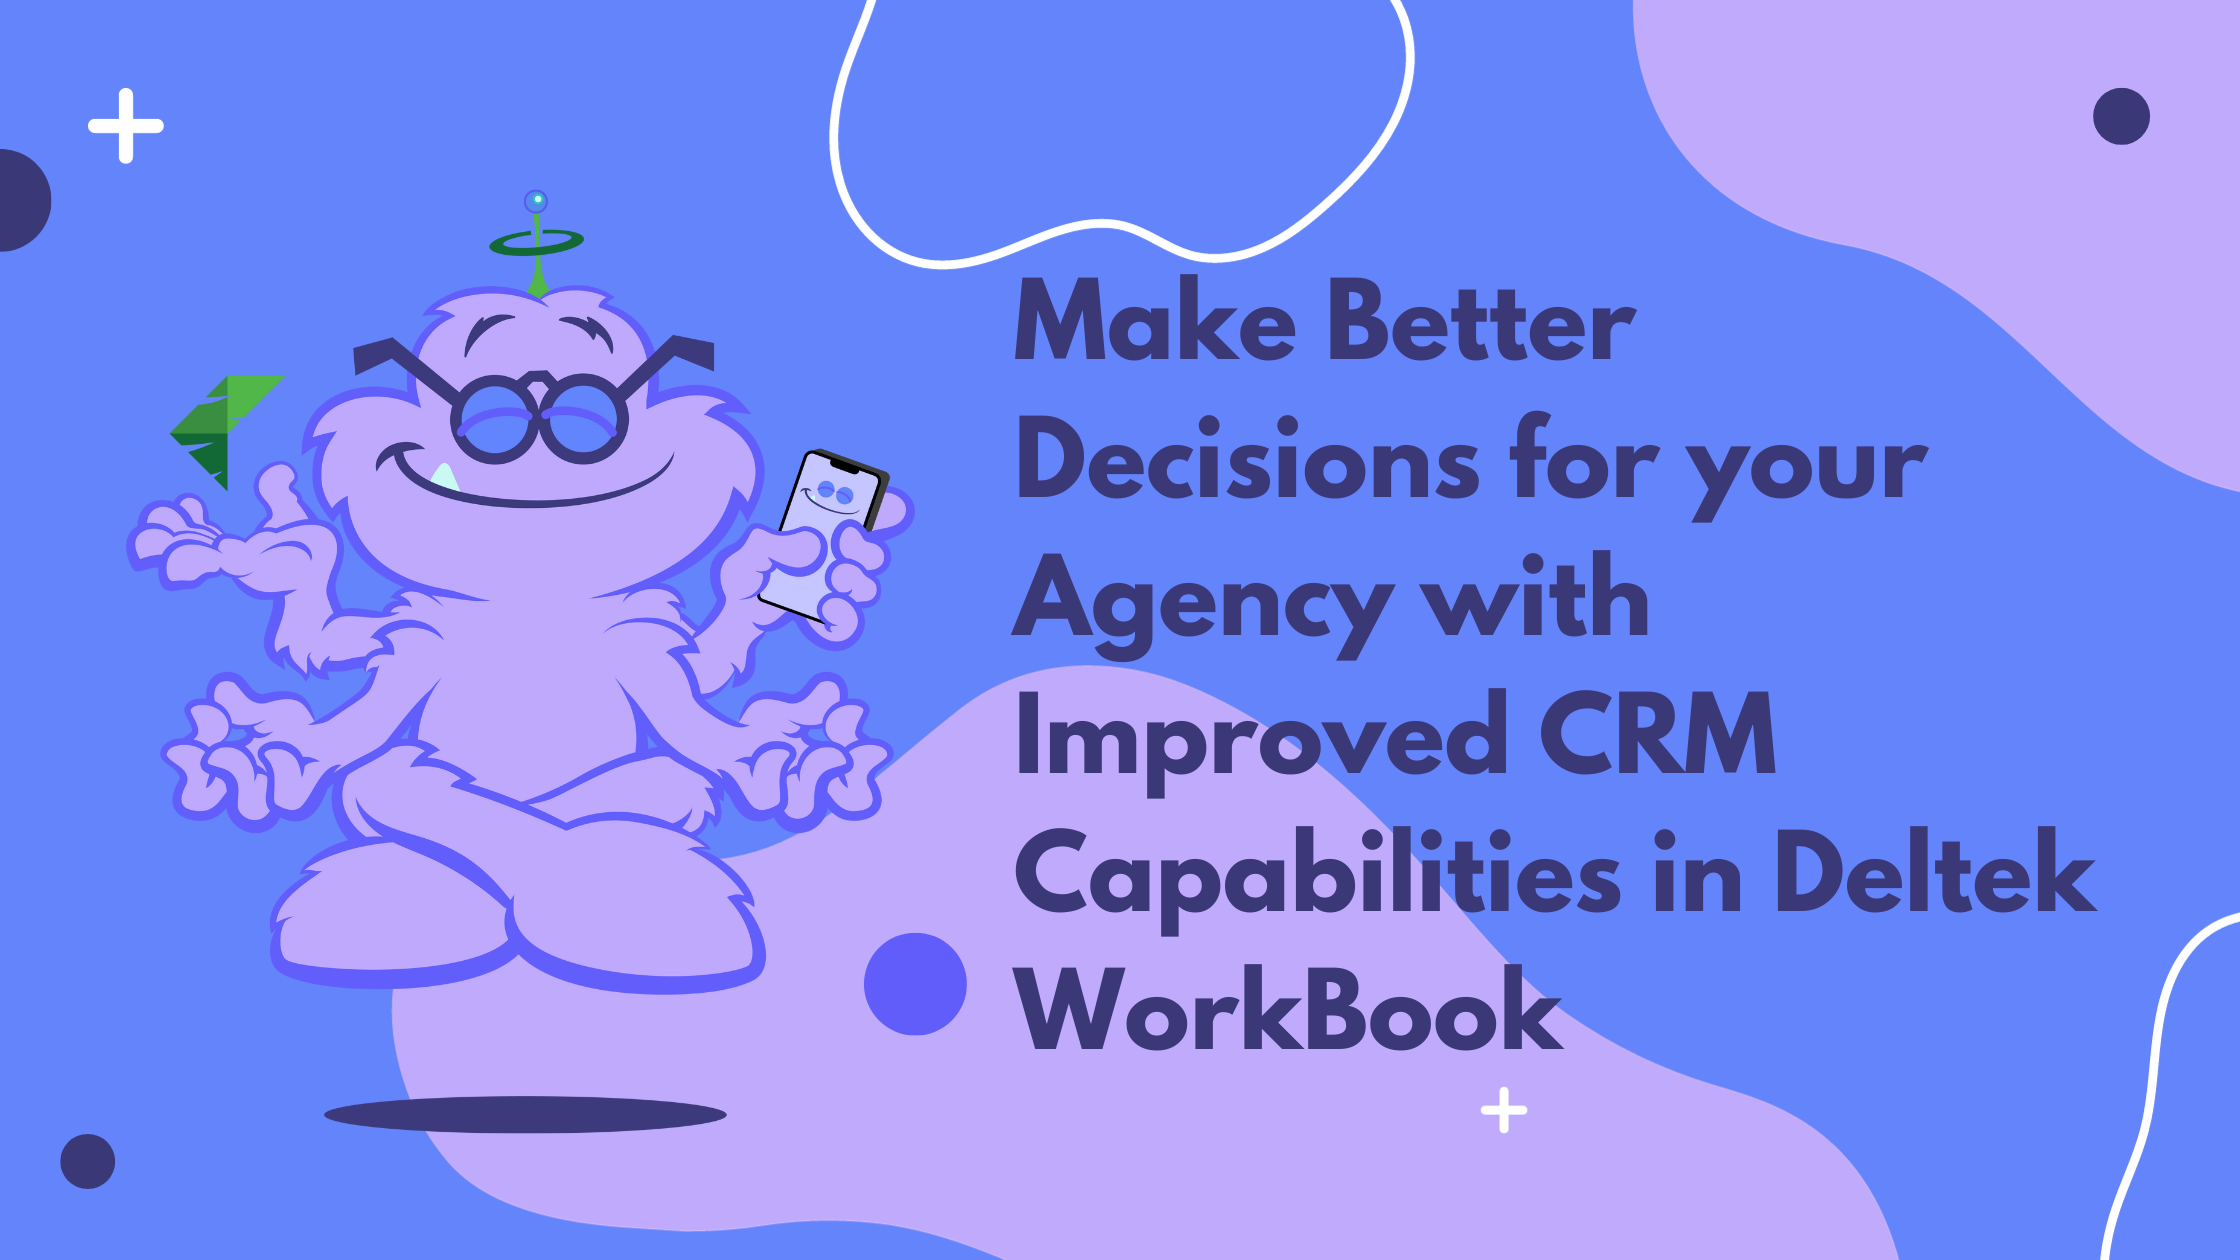 Make Better Decisions for your Agency with Improved CRM Capabilities in Deltek WorkBook